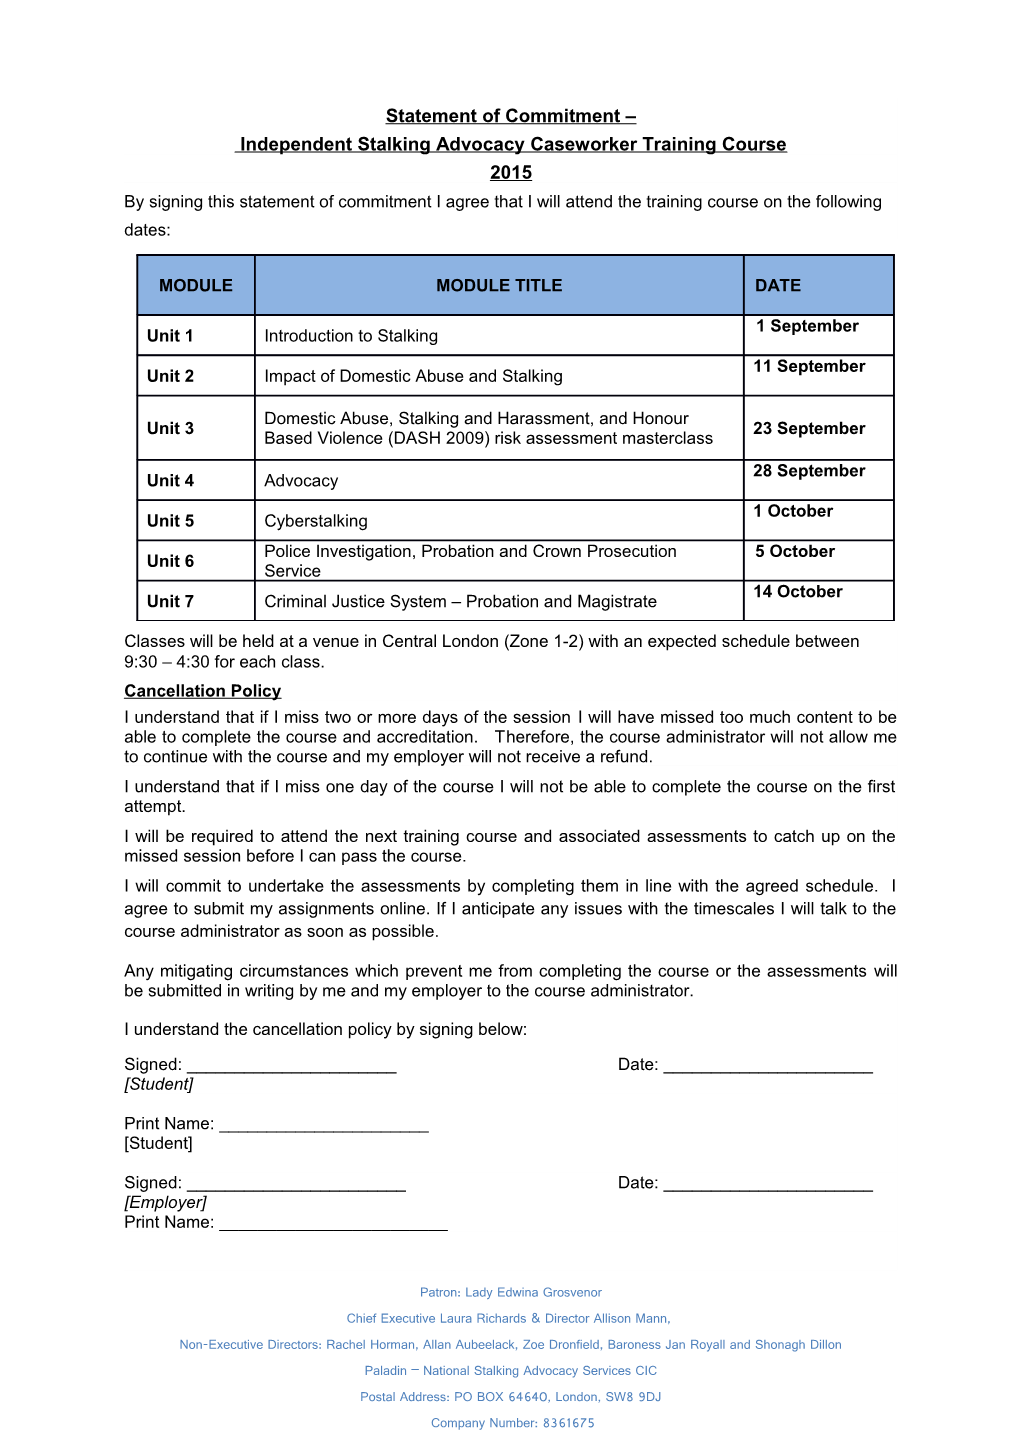 Statement of Commitment Independent Stalking Advocacy Caseworker Training Course